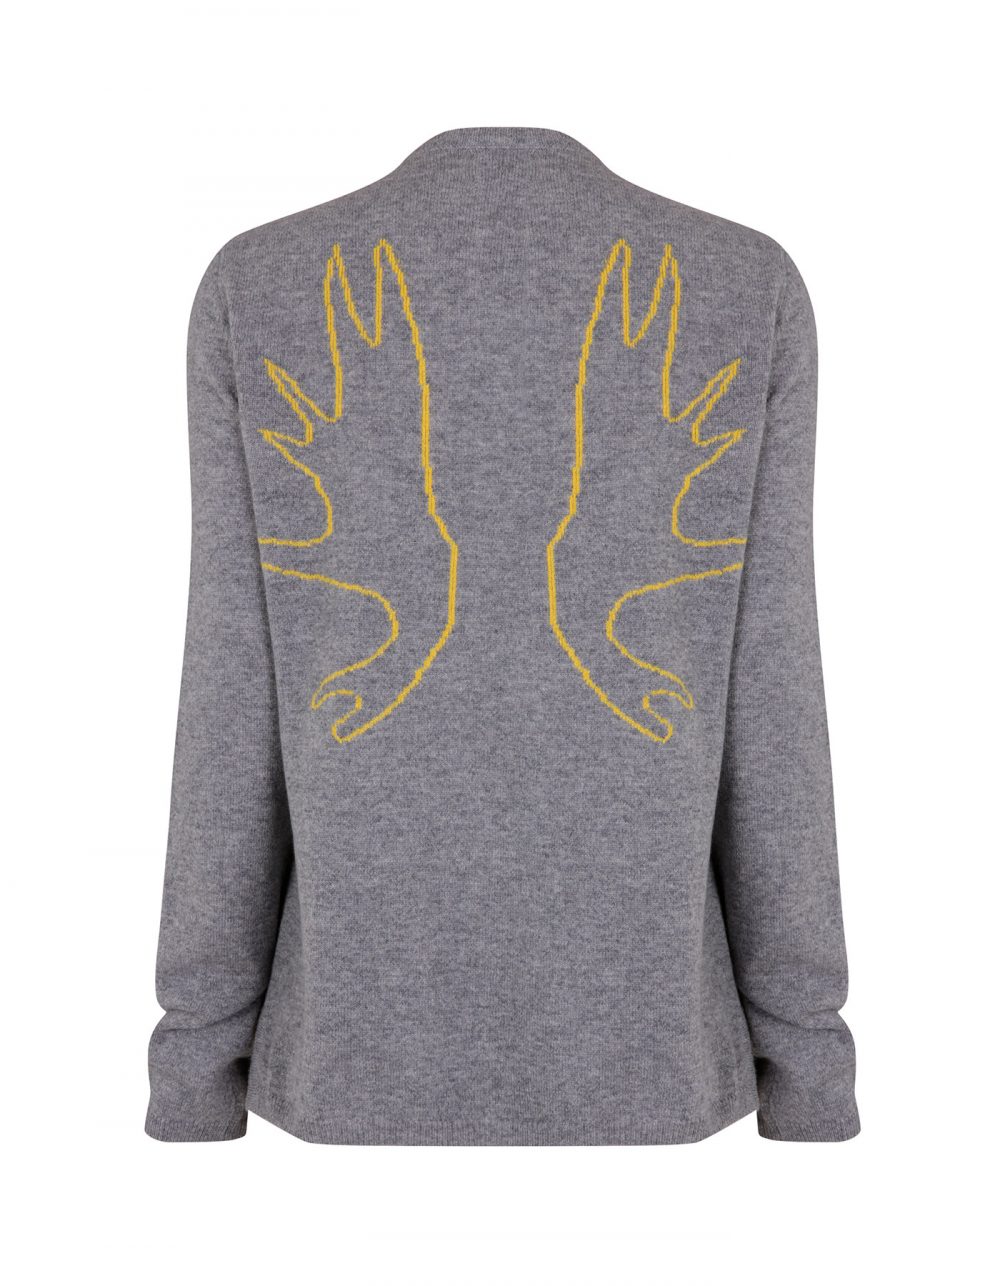 Studio image of the Malin Darlin cashmere jumper showing the antlers design knitted into the pattern.